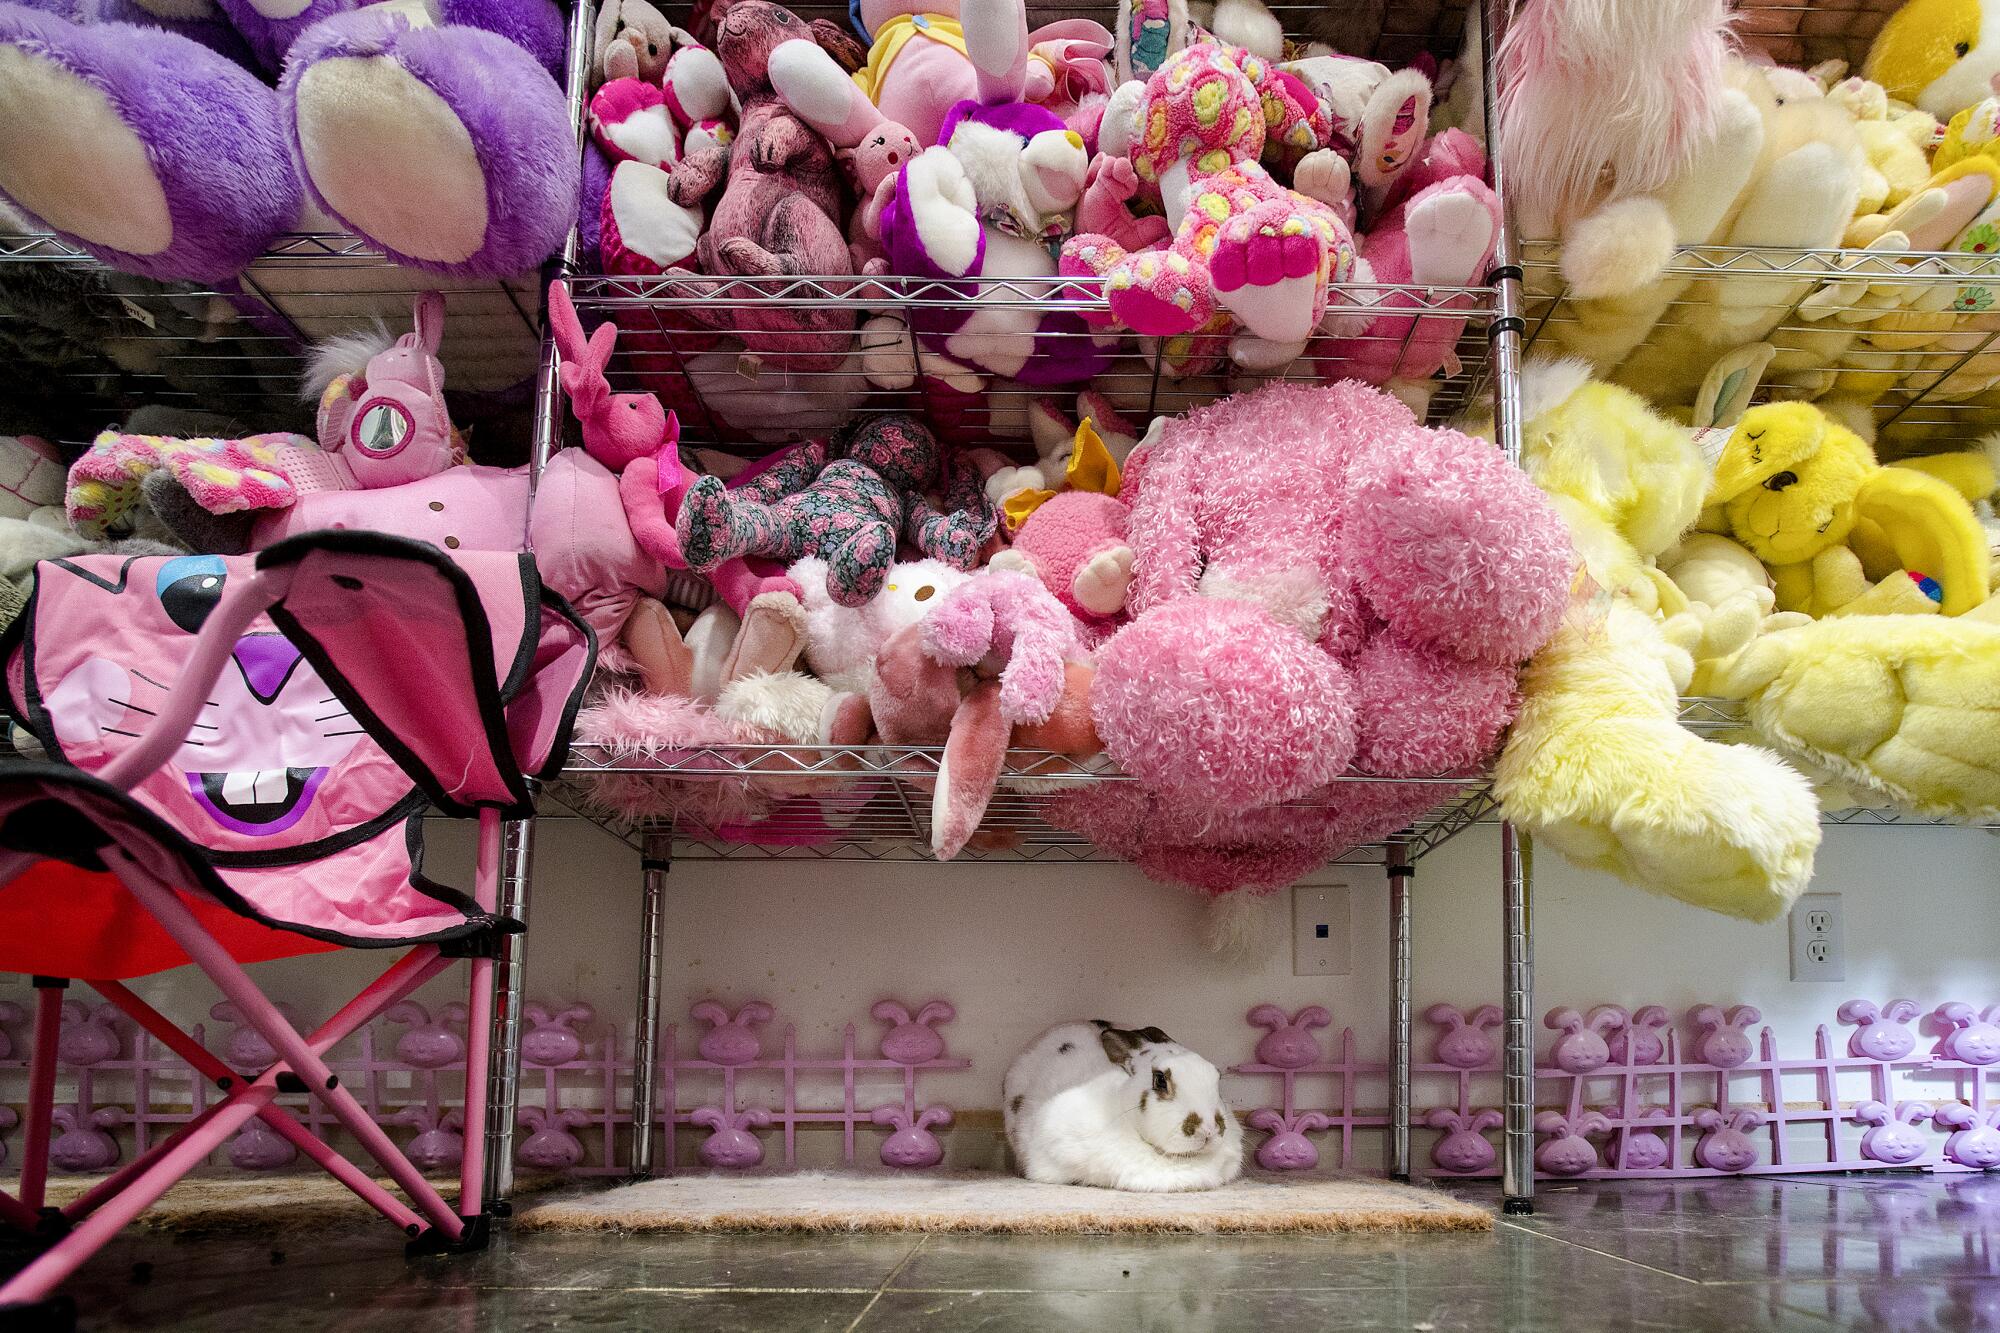 A live bunny sitting on the ground underneath large shelves of stuffed bunny toys